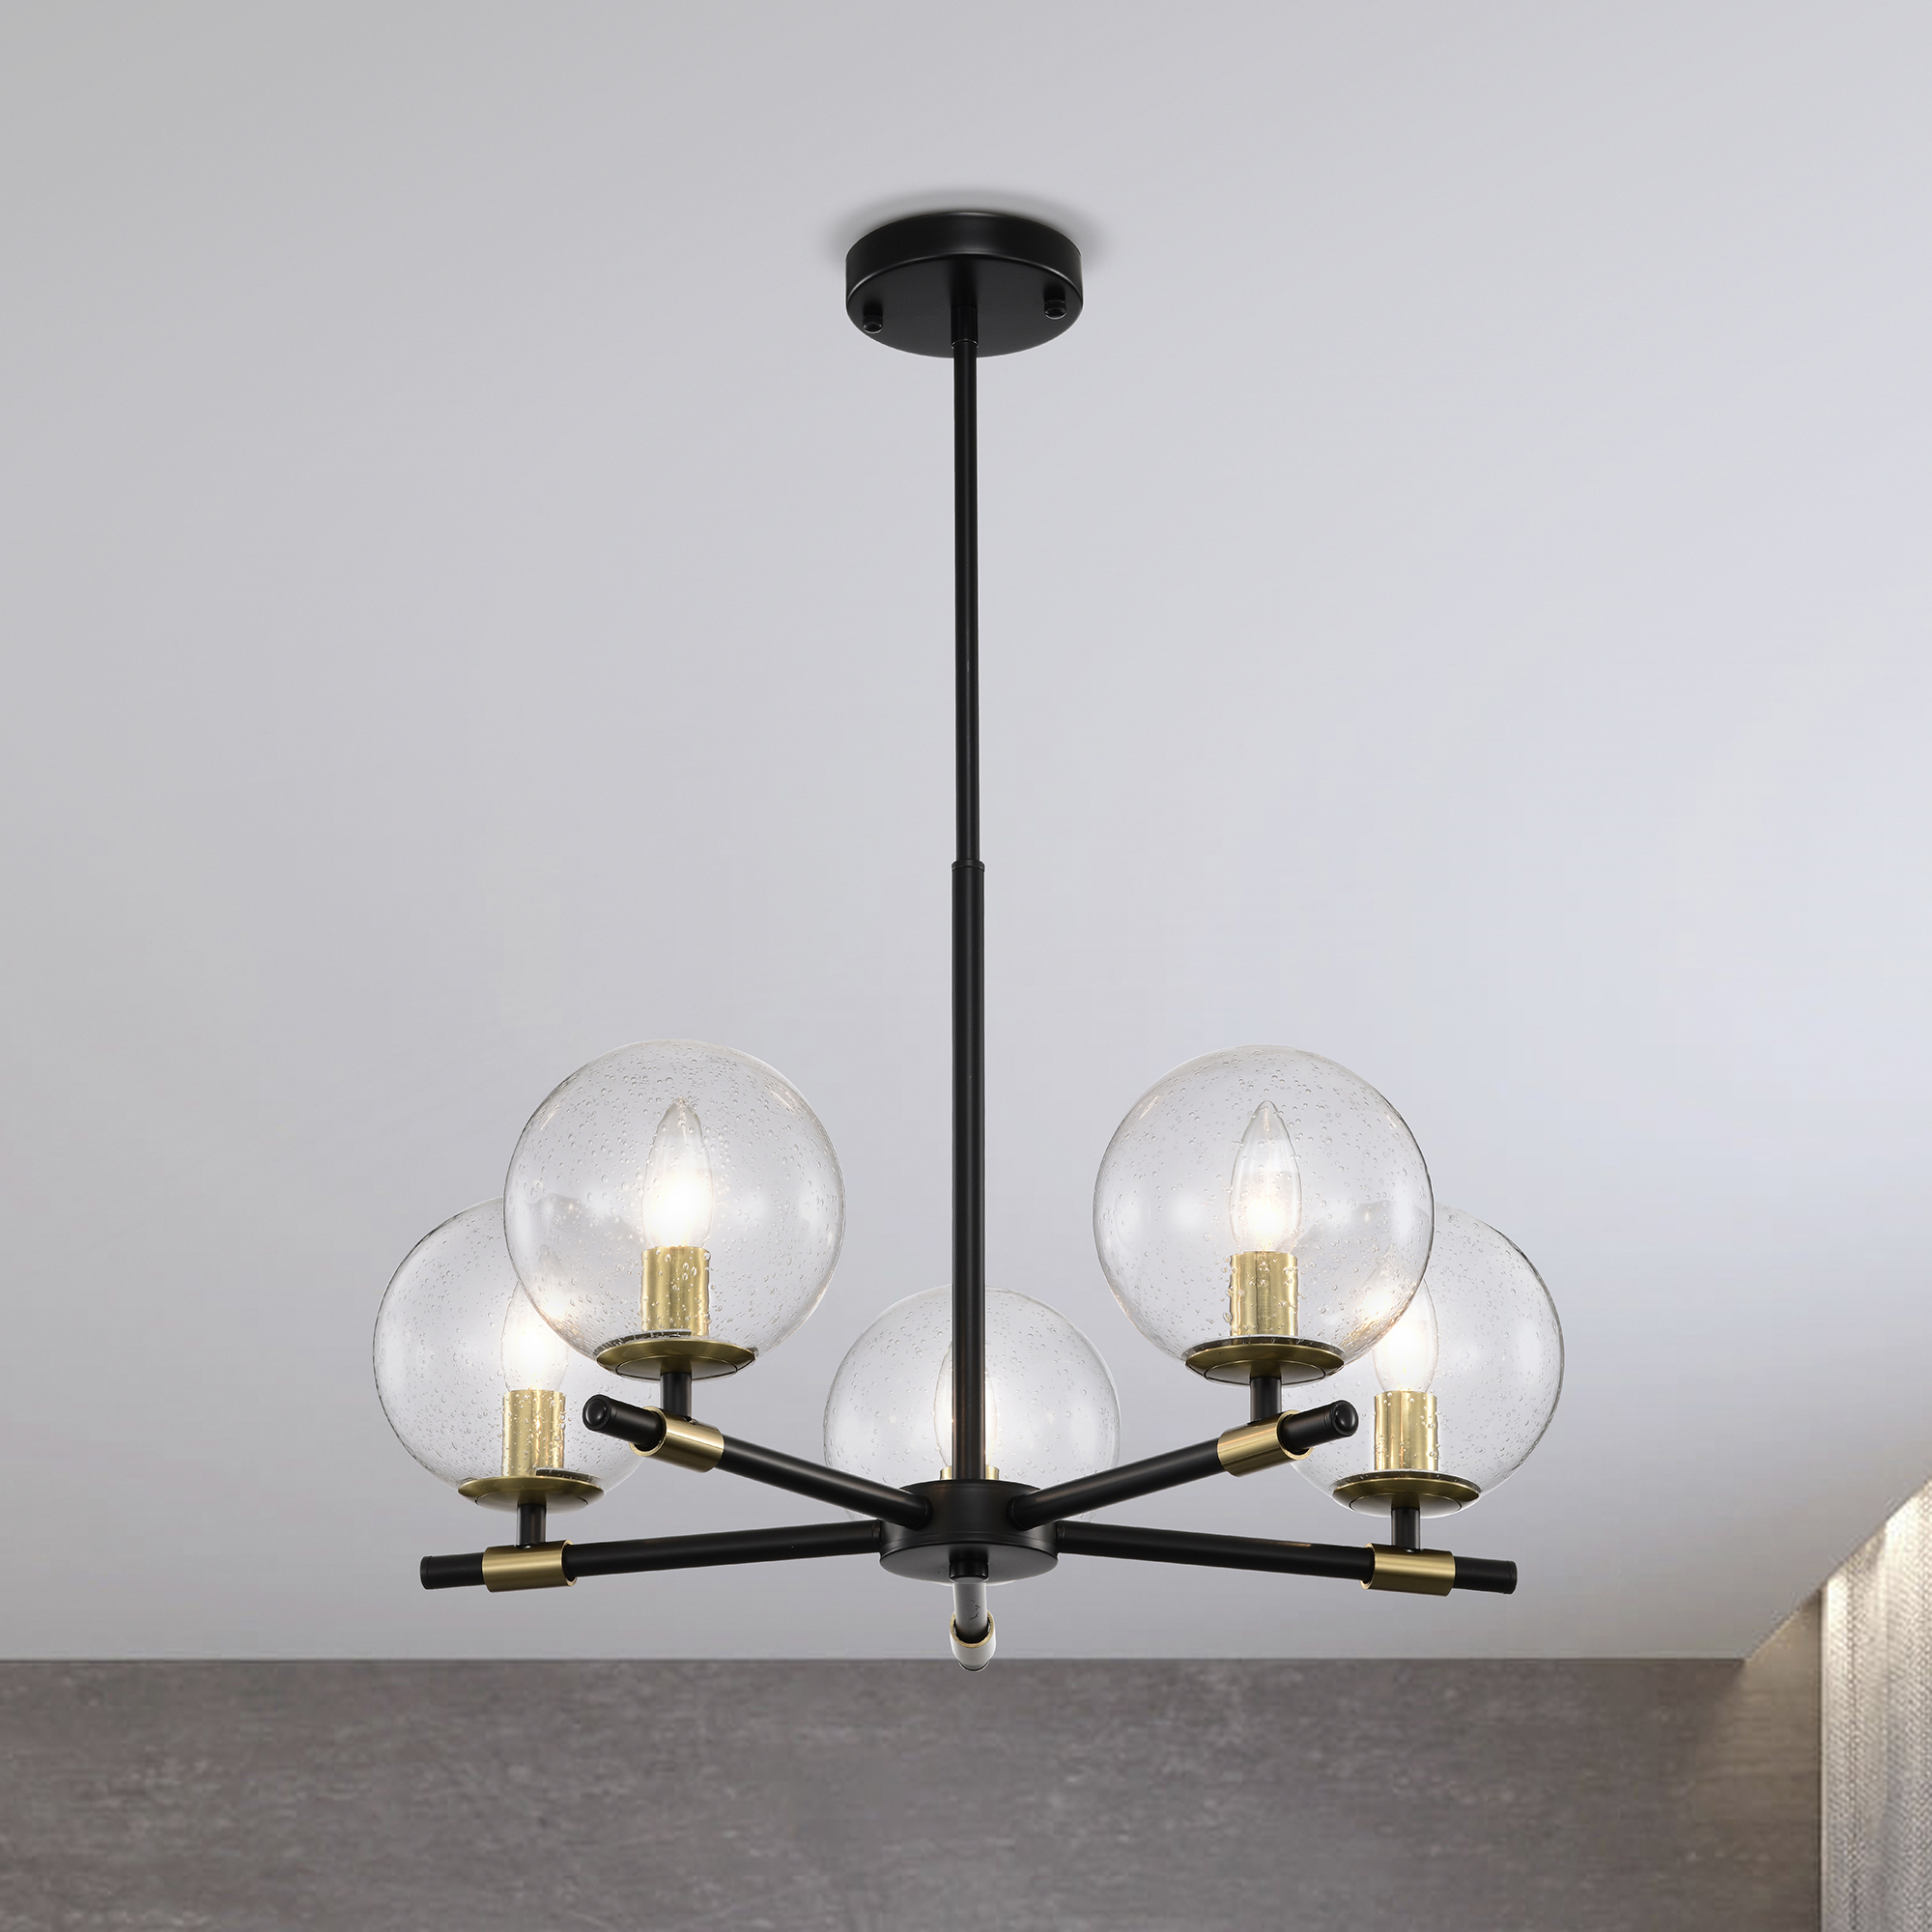 Shauna 22 in. 5-Light Indoor Matte black and Brass Finish Chandelier with Light Kit